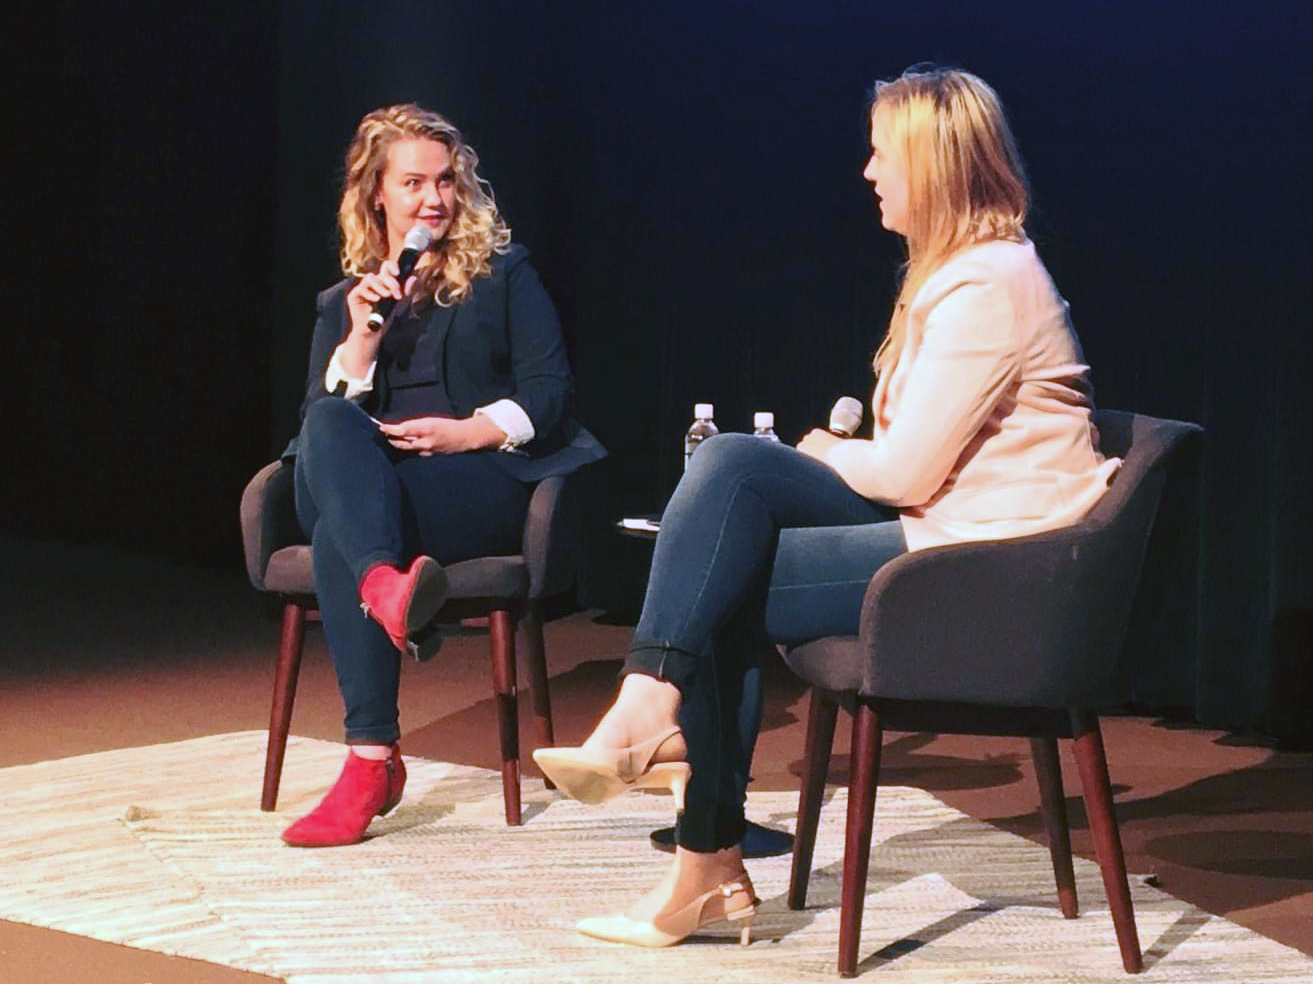 Ruth Schmidt, left, interviews a filmmaker for a live audience in Travis Auditorium at Fuller Theological Seminary in May 2019. (Courtesy photo)